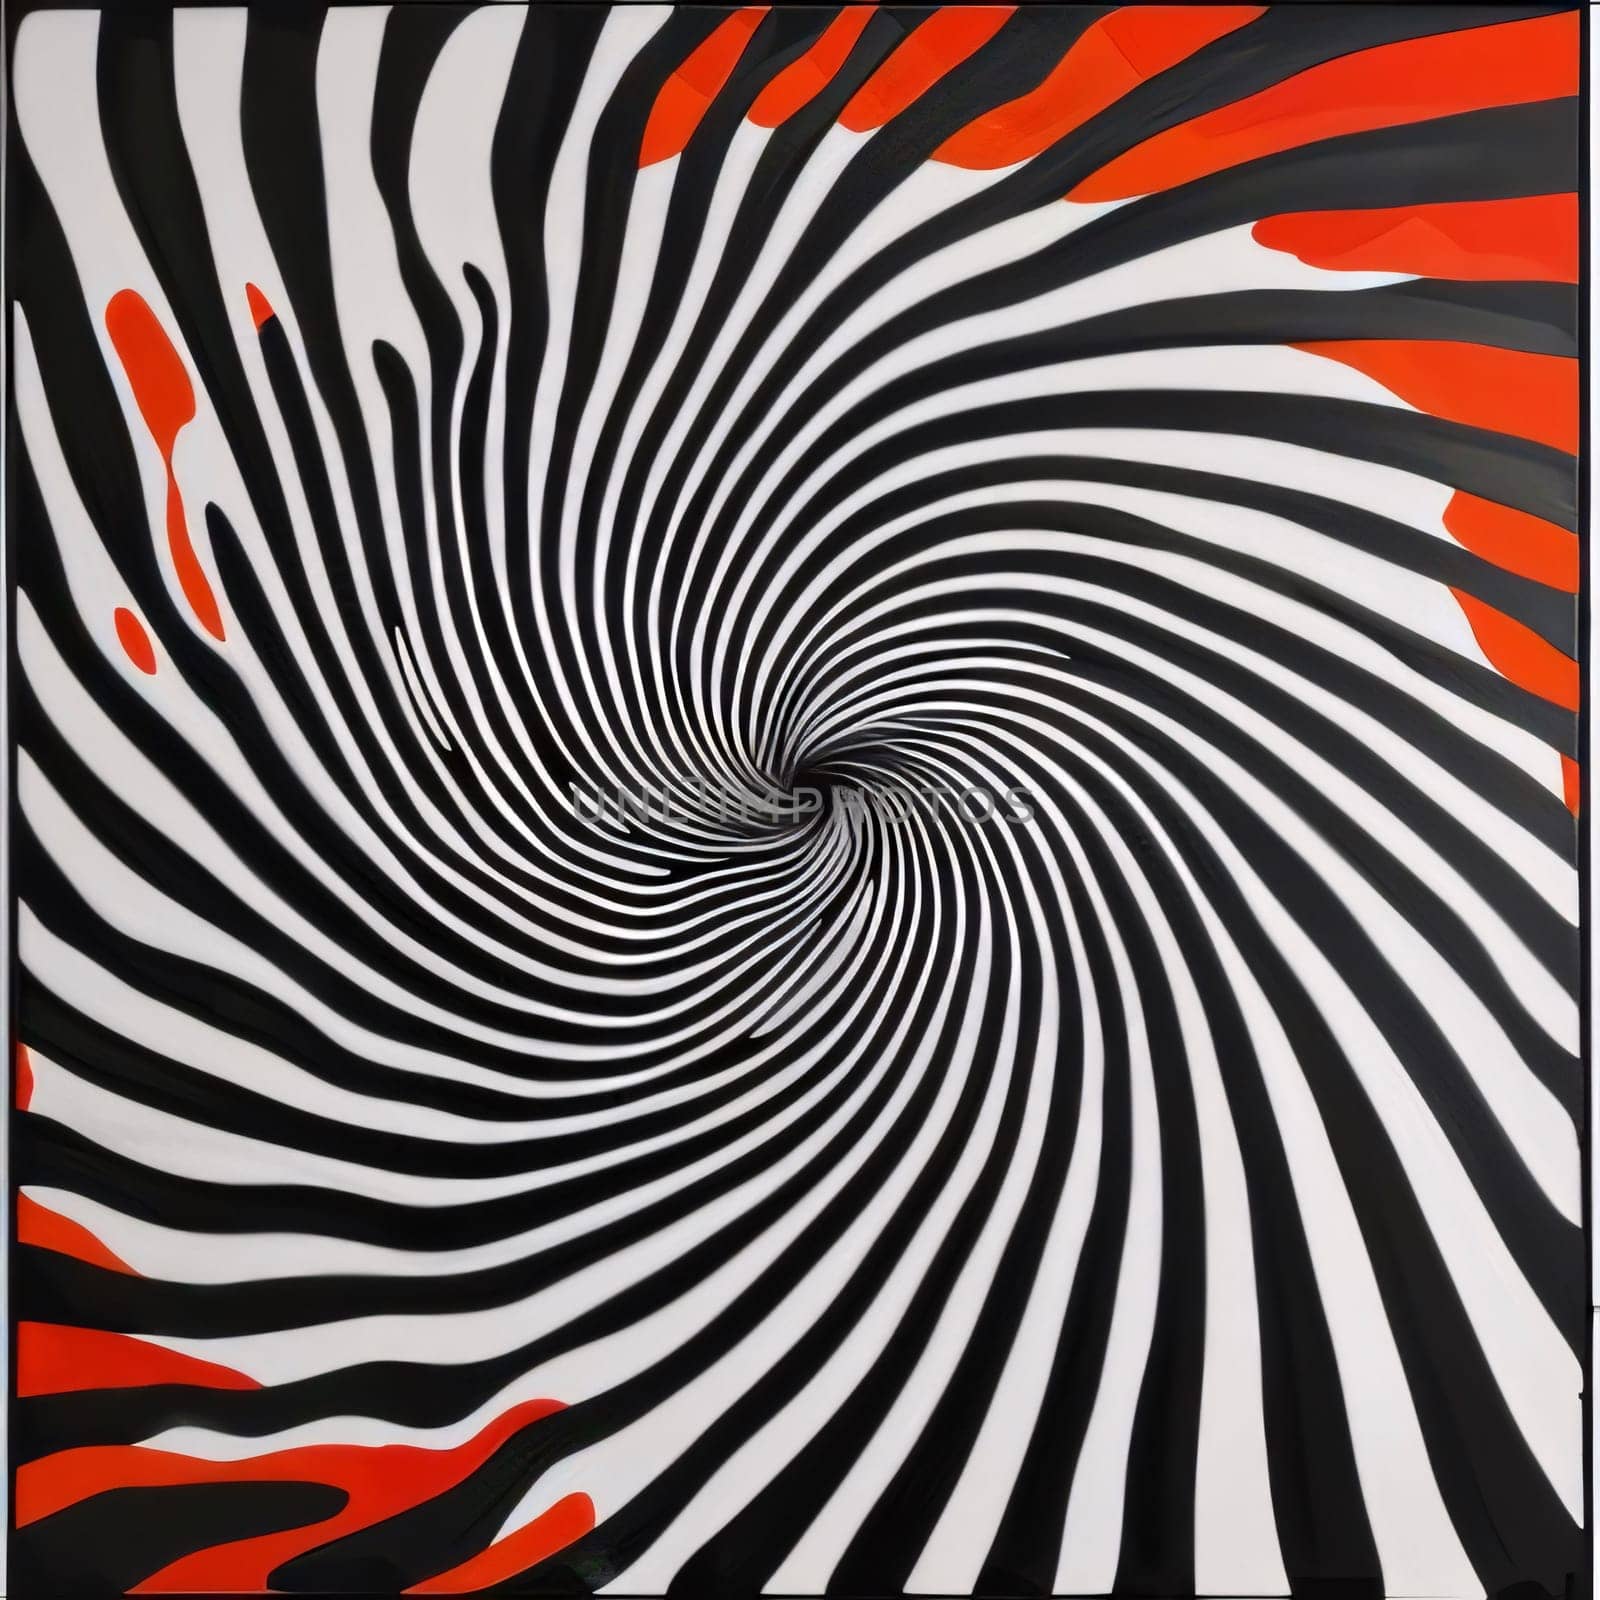 Abstract background design: Abstract black and red spiral background. Vector illustration for your design.